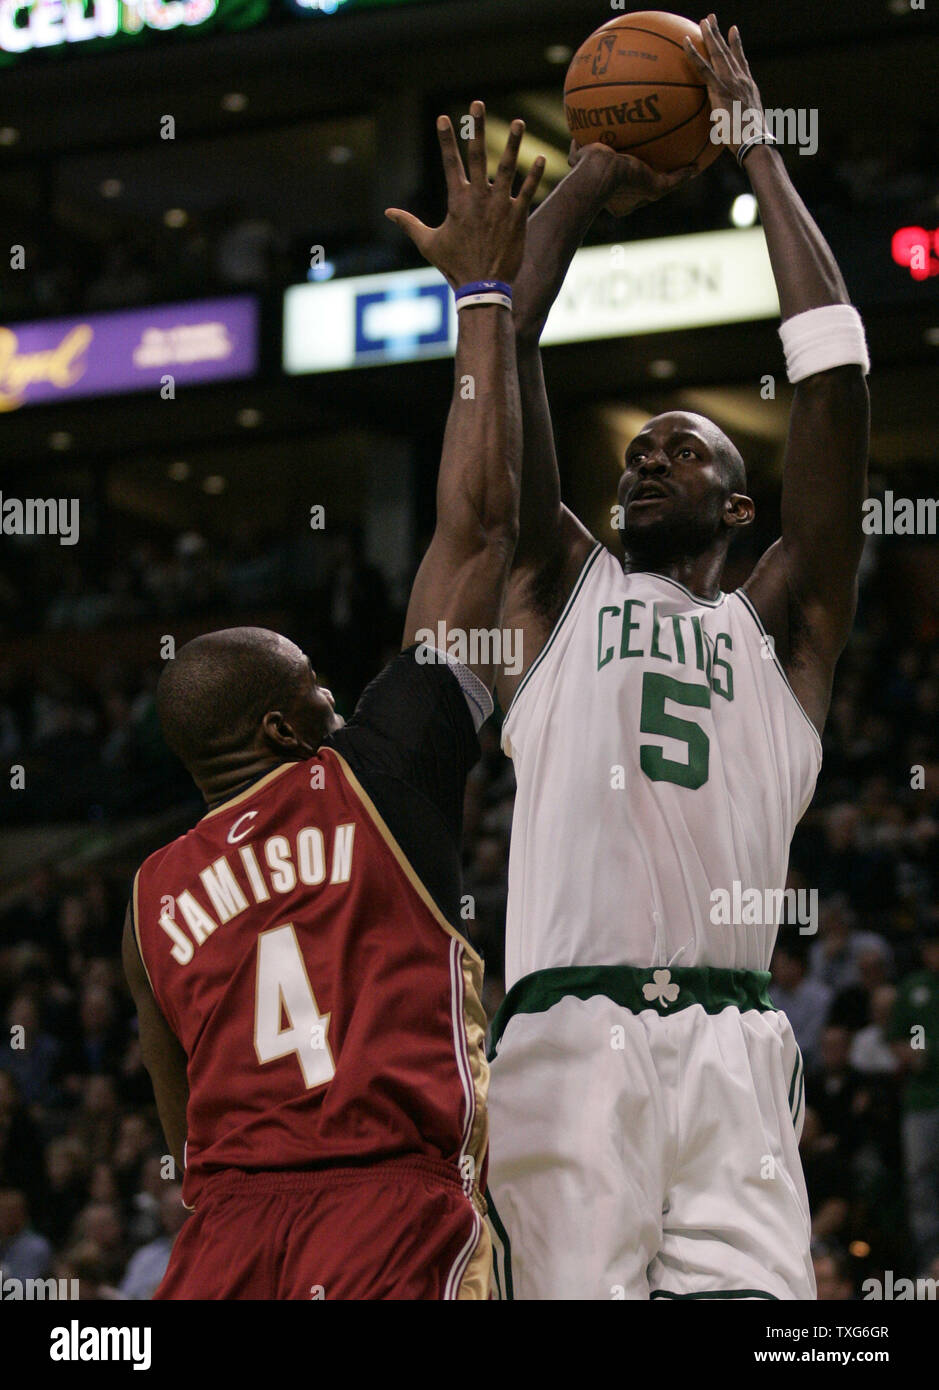 Boston Celtics forward Kevin Garnett (5) gets off a shot while under pressure by Cleveland Cavaliers forward Antawn Jamison (4) in the second half at the TD Garden in Boston, Massachusetts on February 25, 2010.  The Cavaliers defeated the Celtics 108-88.   UPI/Matthew Healey Stock Photo